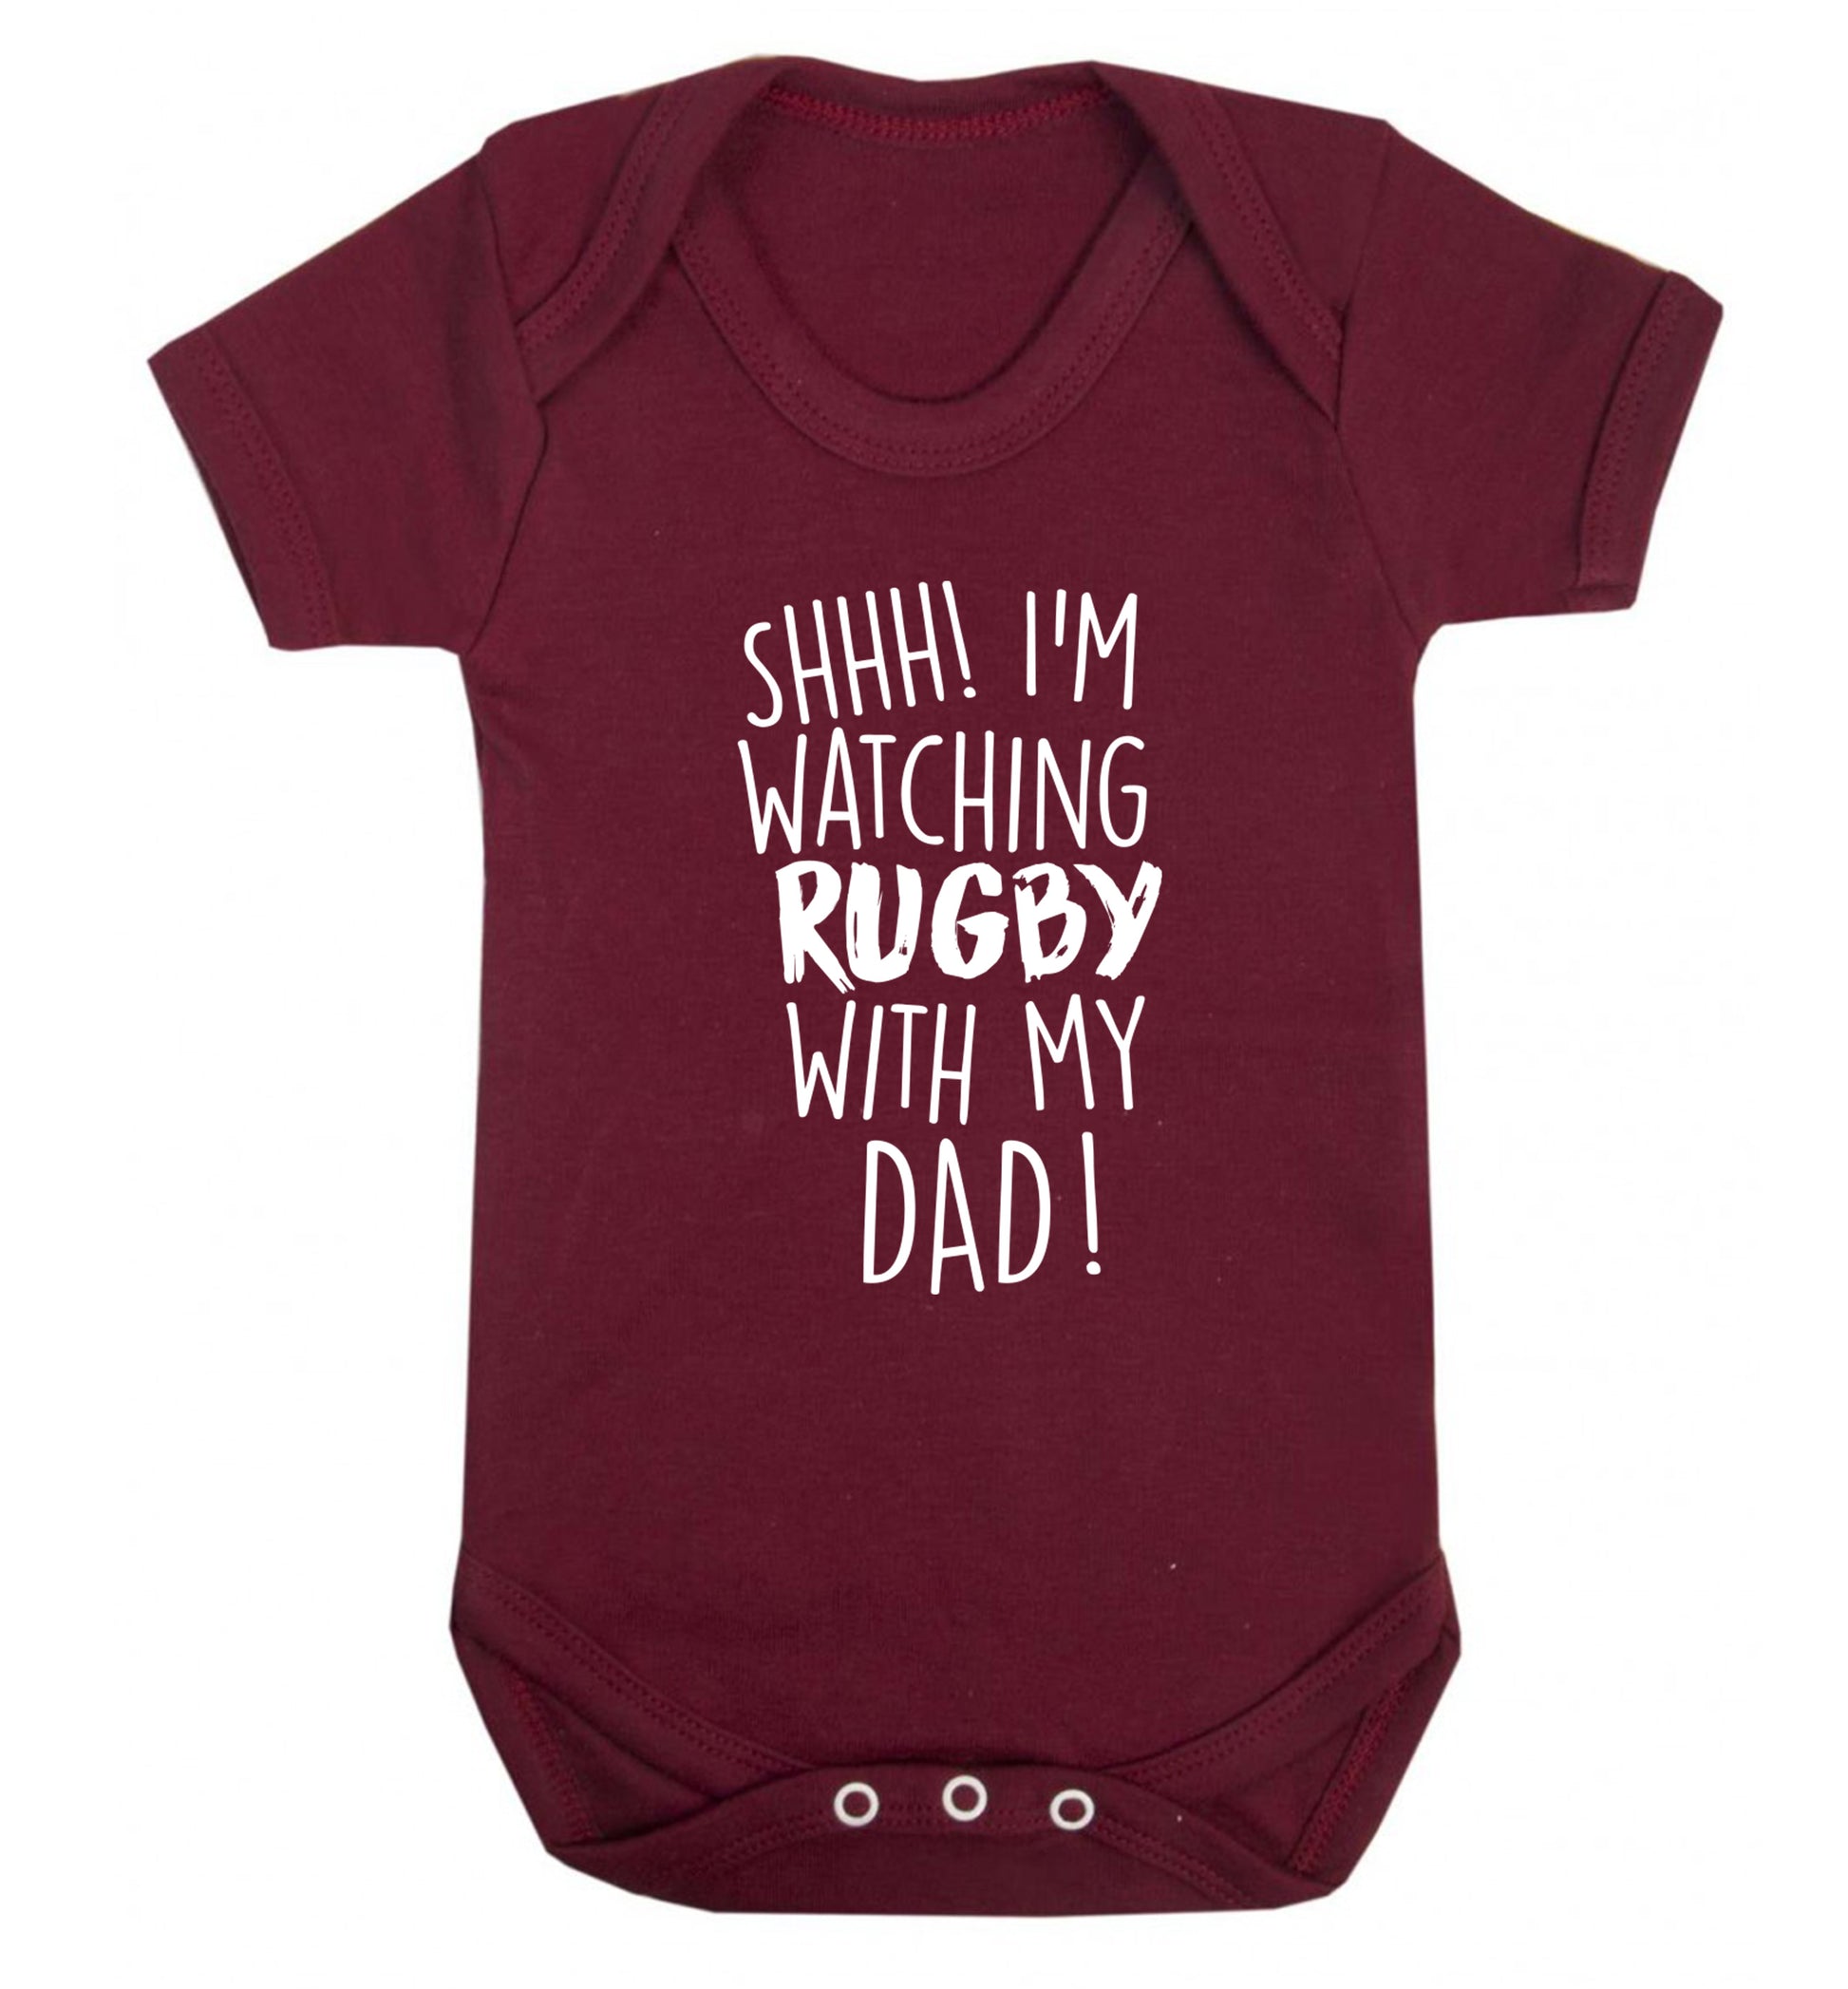 Shh... I'm watching rugby with my dad Baby Vest maroon 18-24 months